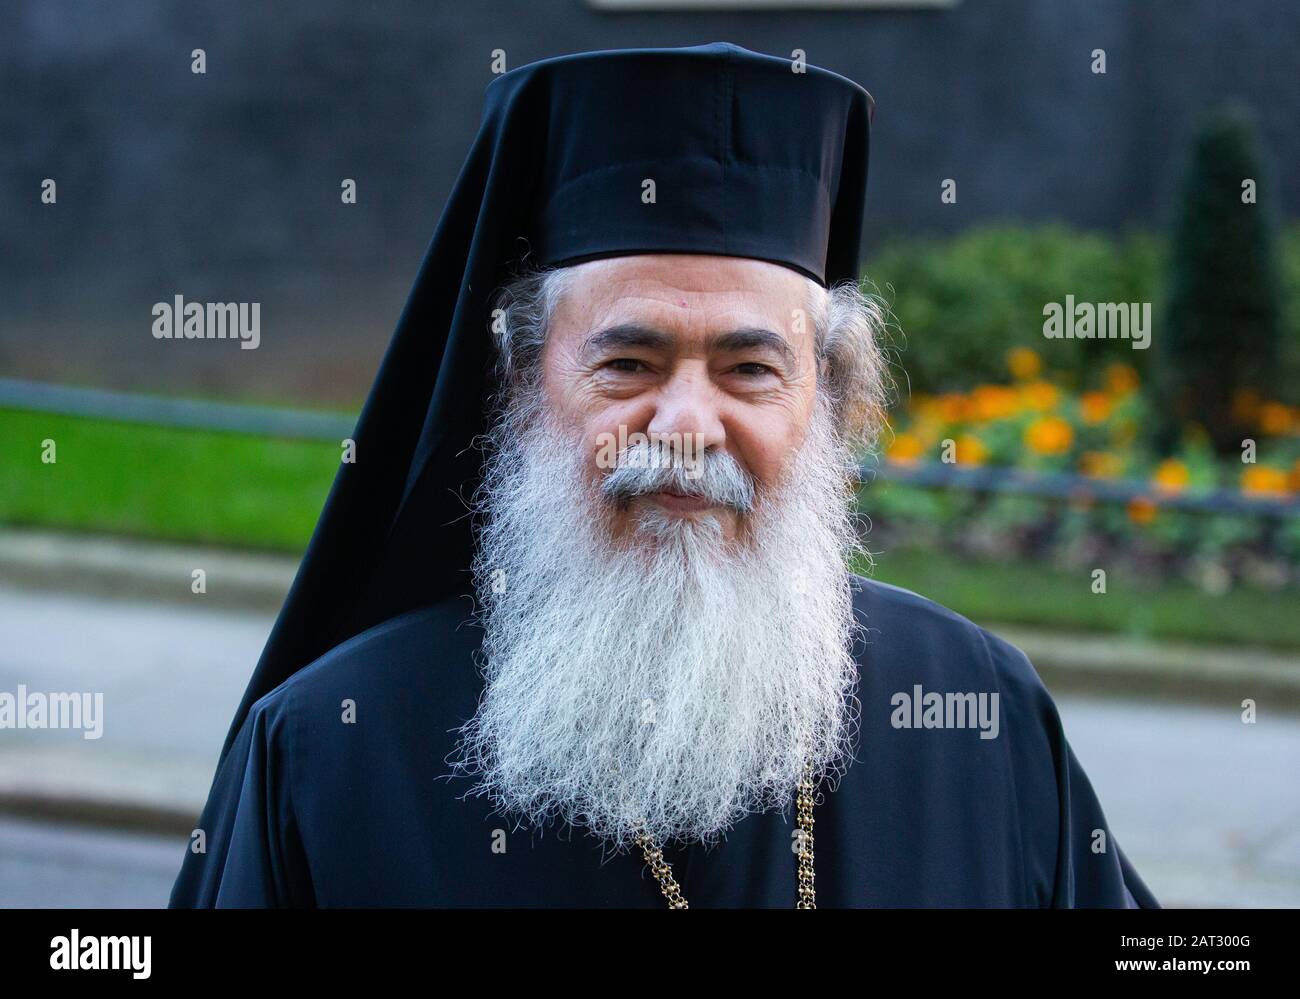 Patriarch Theophilos III of Jerusalem, 141st primate of the Orthodox Church of Jerusalem and all Palestine and Israel at Downing Street for a meeting Stock Photo